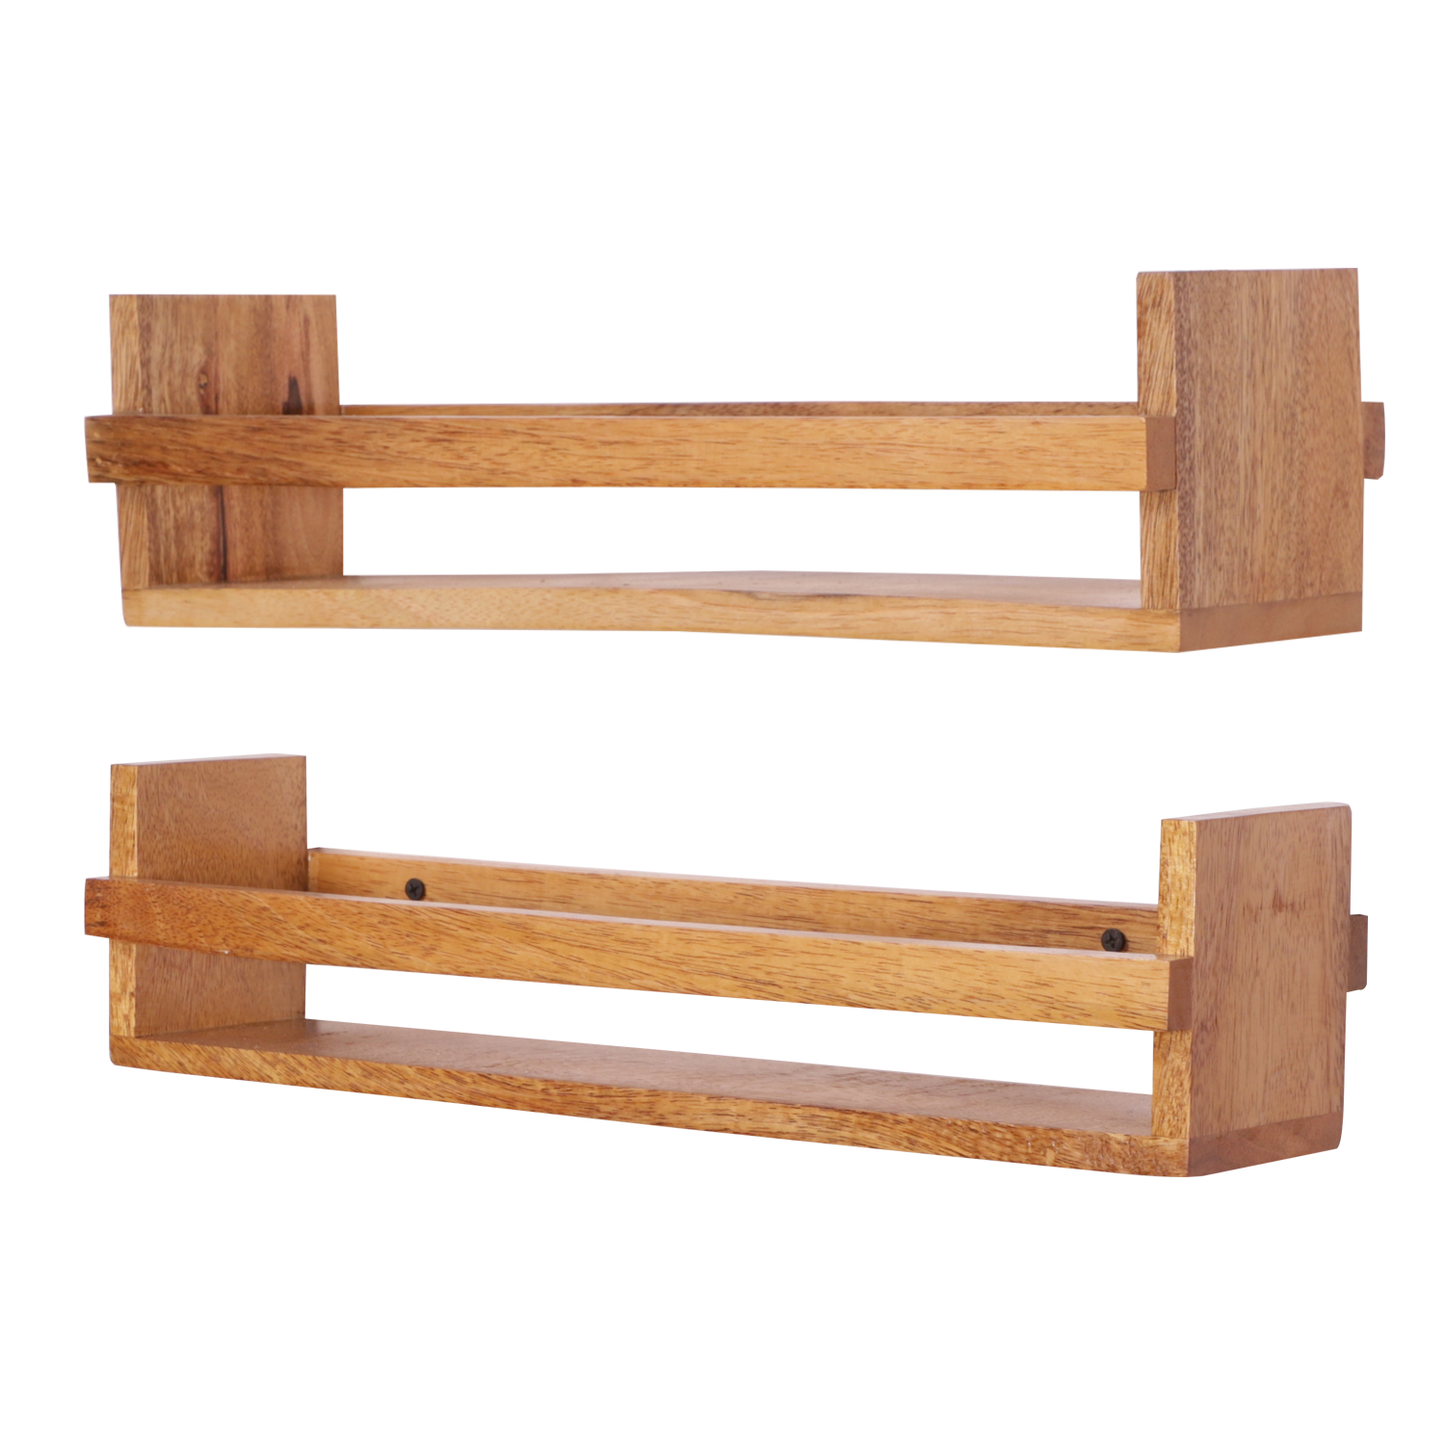 The Weaver's Nest : Wooden Shelves for Kitchen Storage with glass bottles : Set of two